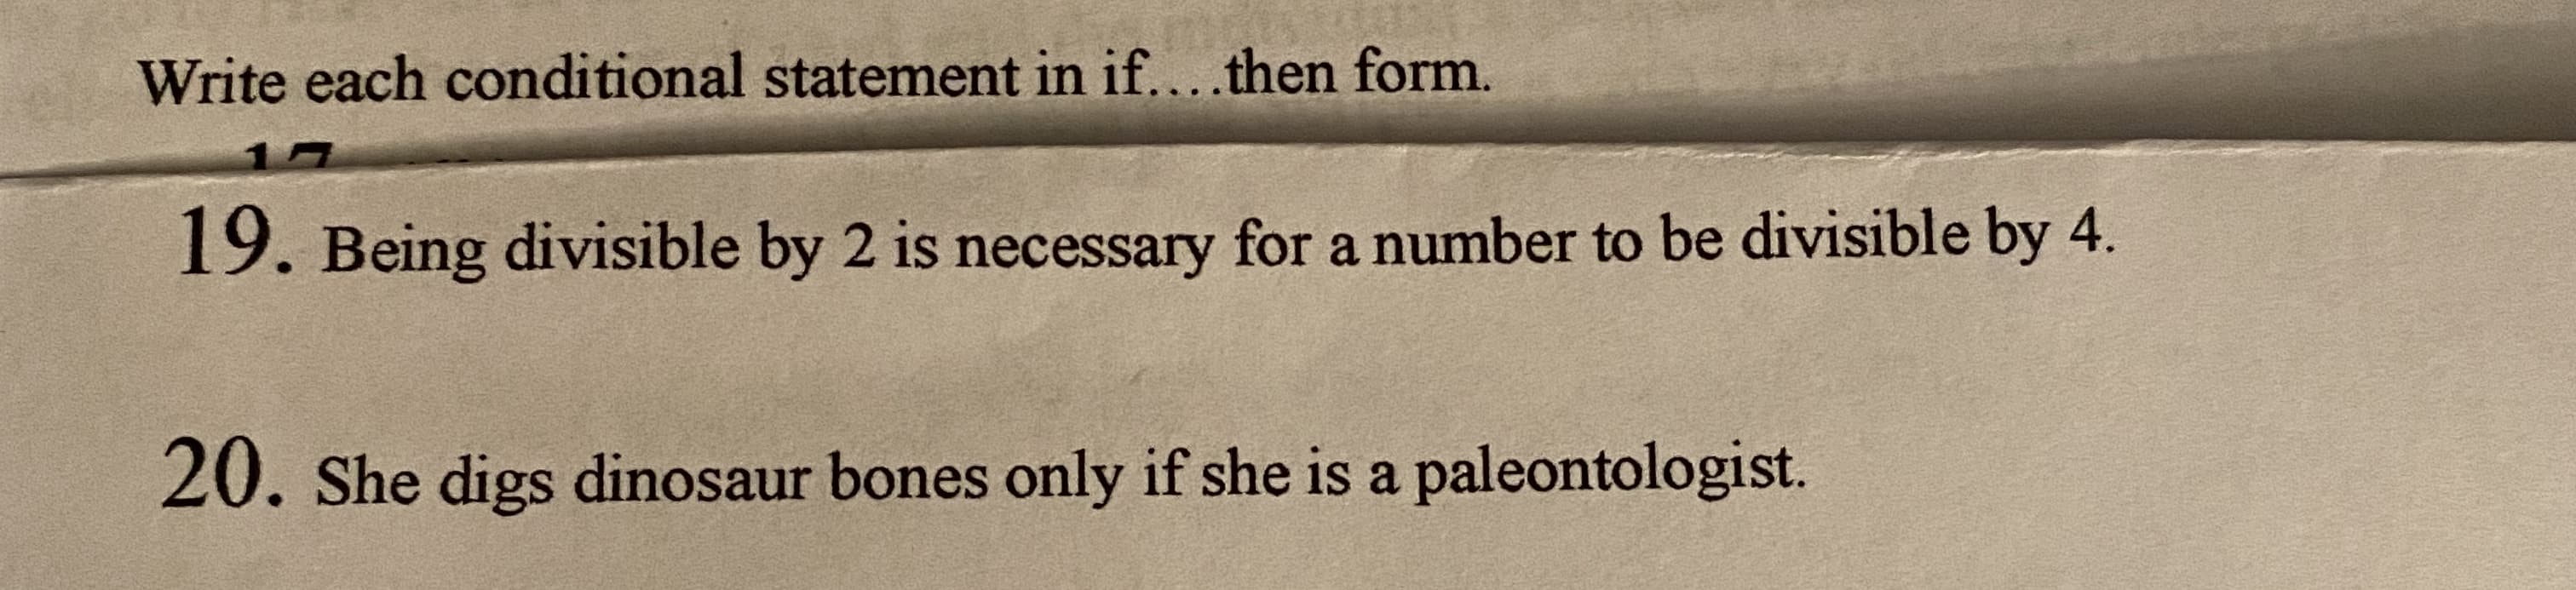 Write each conditional statement in if....then form.
19. Being divisible by 2 is necessary for a number to be divisible by 4.
20. She digs dinosaur bones only if she is a paleontologist.
